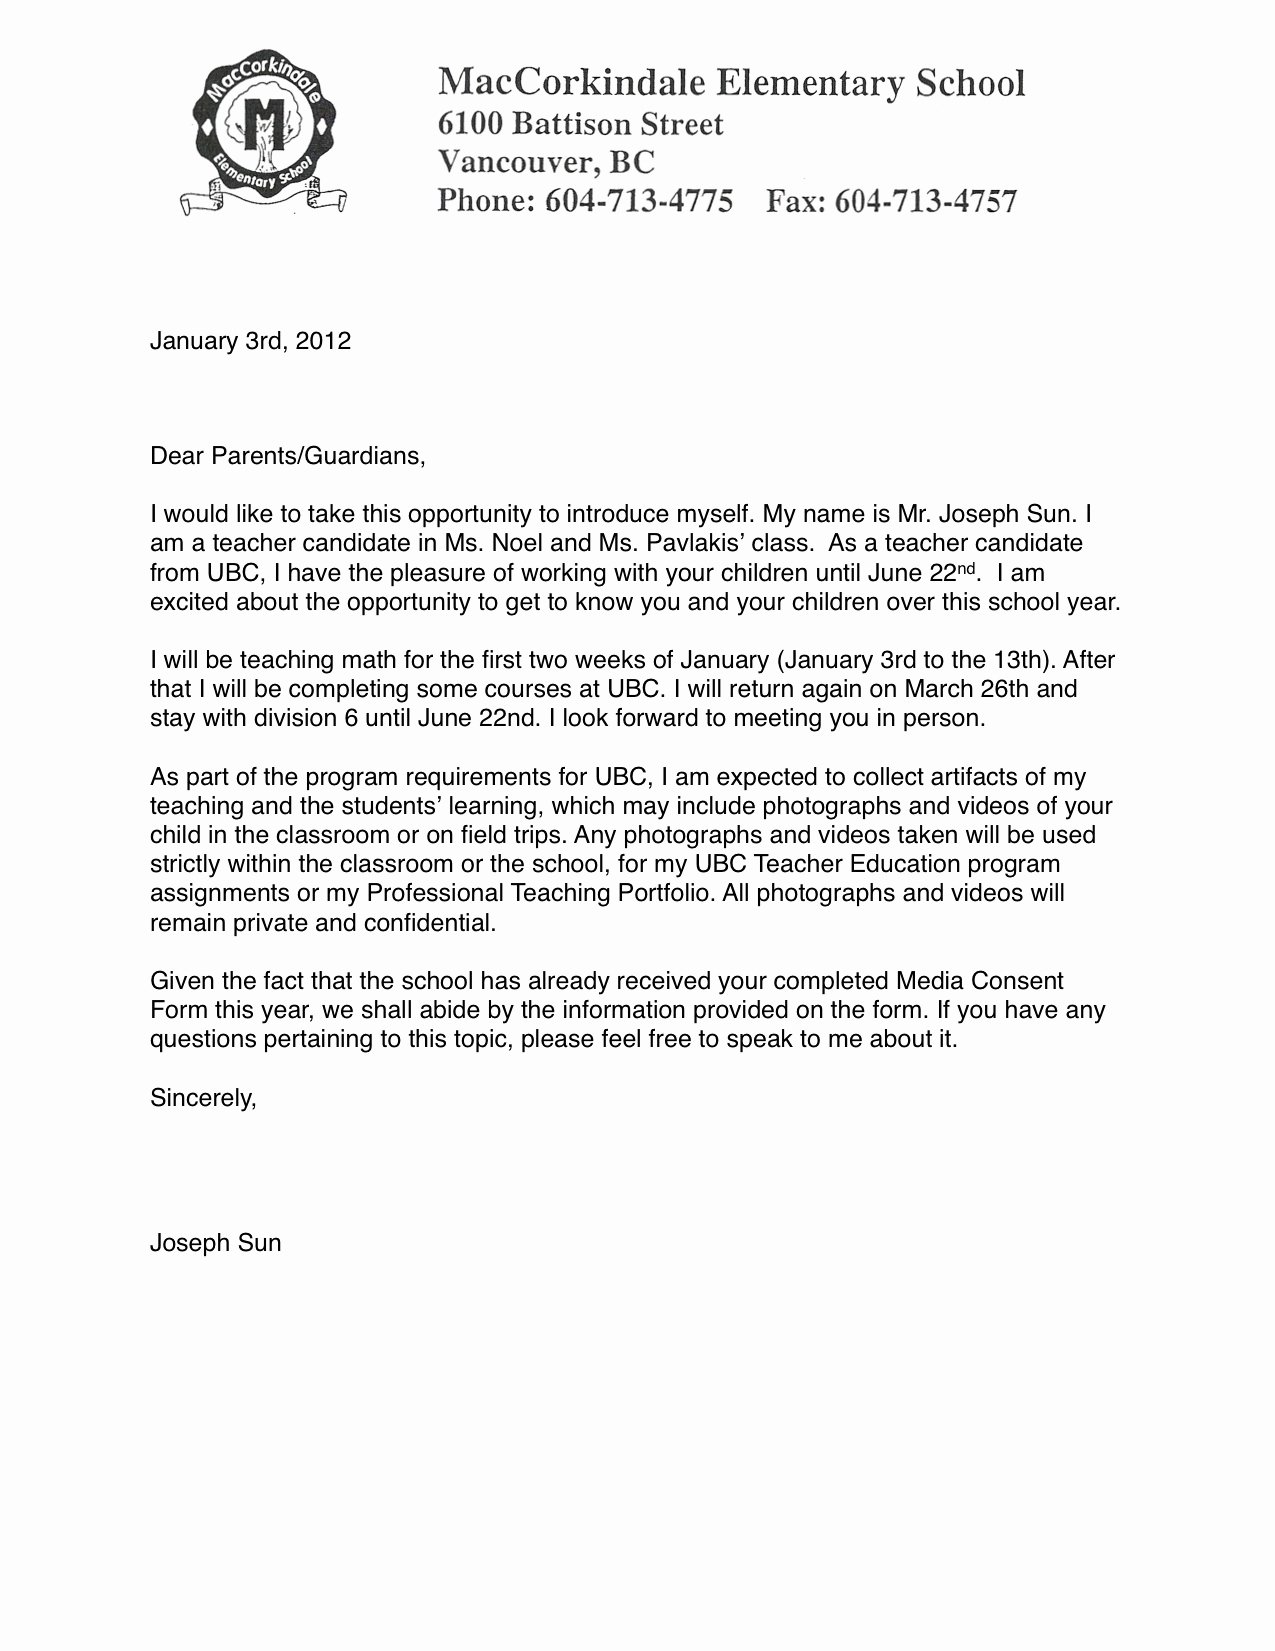 Letter to Parent Template New 301 Moved Permanently